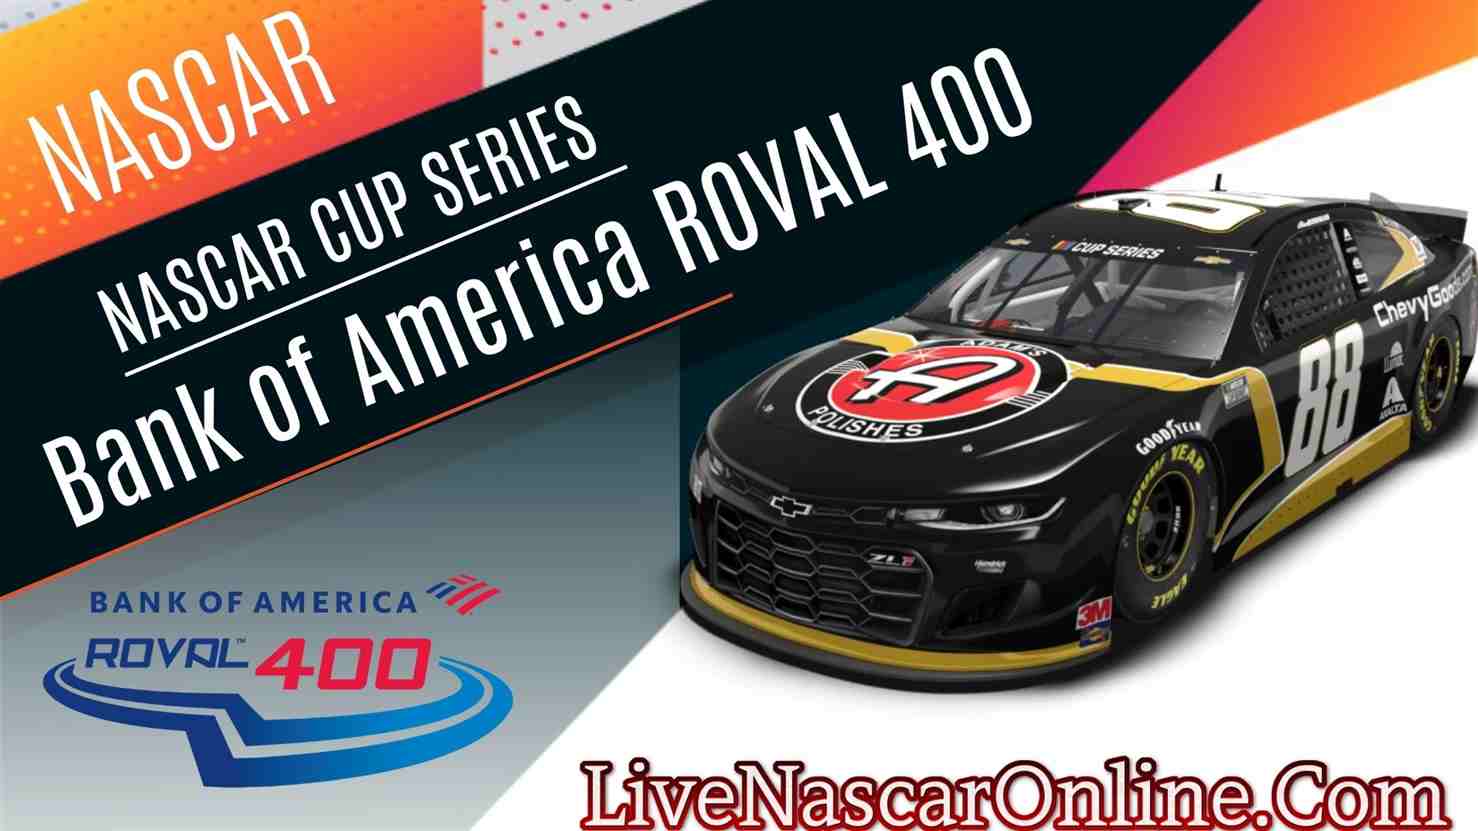 Bank of America ROVAL 400 Highlights 2020 Nascar Cup Series